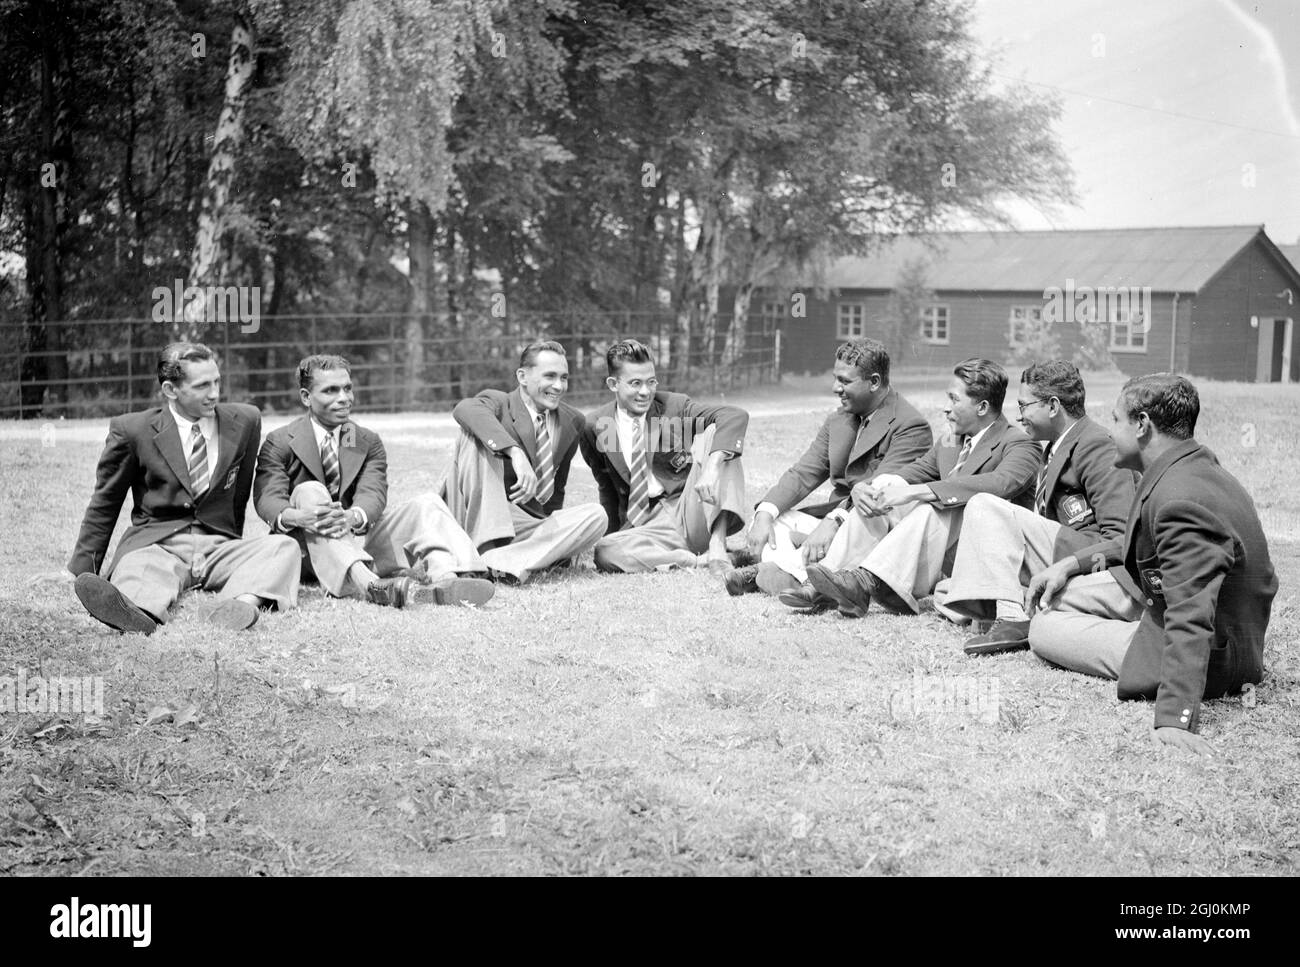 The Ceylon Olympic Team that arrived in the country last night, spent their first day leisurely at the Olympic Camp in Richmond Park, London. The Ceylon Olympic team left to right:- Edward Gray, Albert Perera, Duncan White, John De Sarem, Mr Perera (team manager), George Peiris, Leslie Handunge and Alexander Obeyesekere, 13 June 1948 Stock Photo